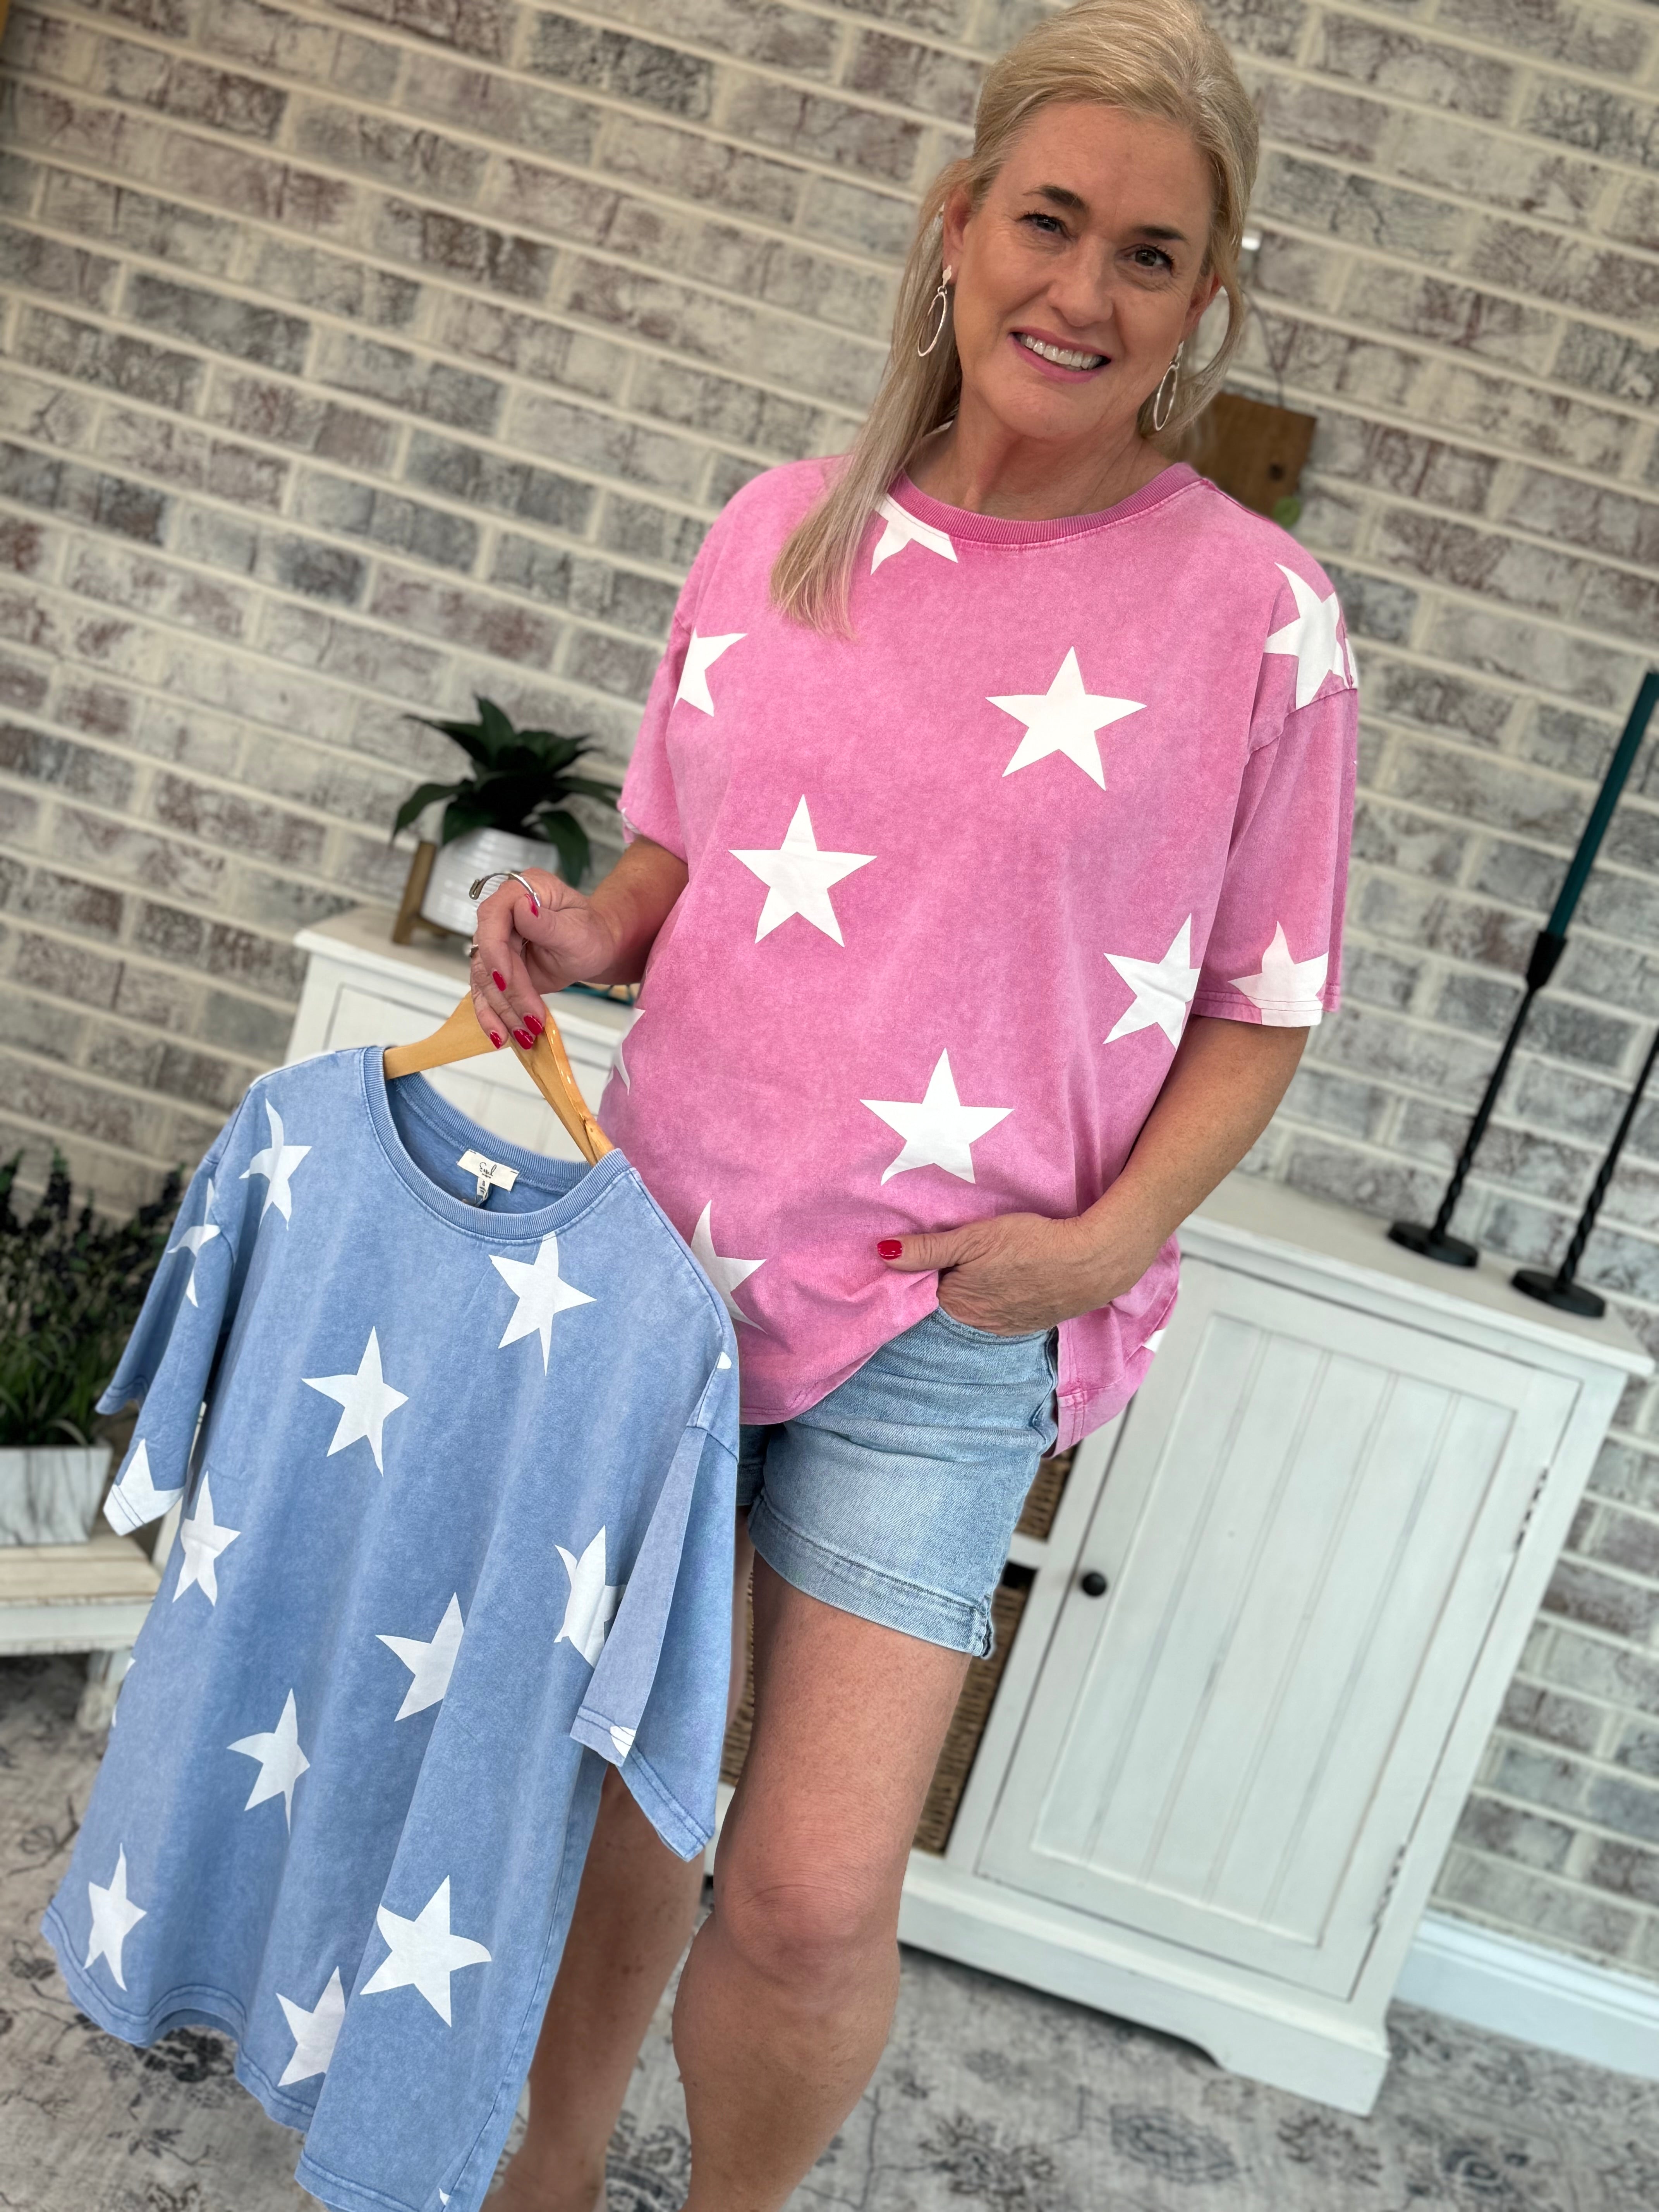 FINAL SALE We See You Star Print Top-Tops-The Lovely Closet-The Lovely Closet, Women's Fashion Boutique in Alexandria, KY